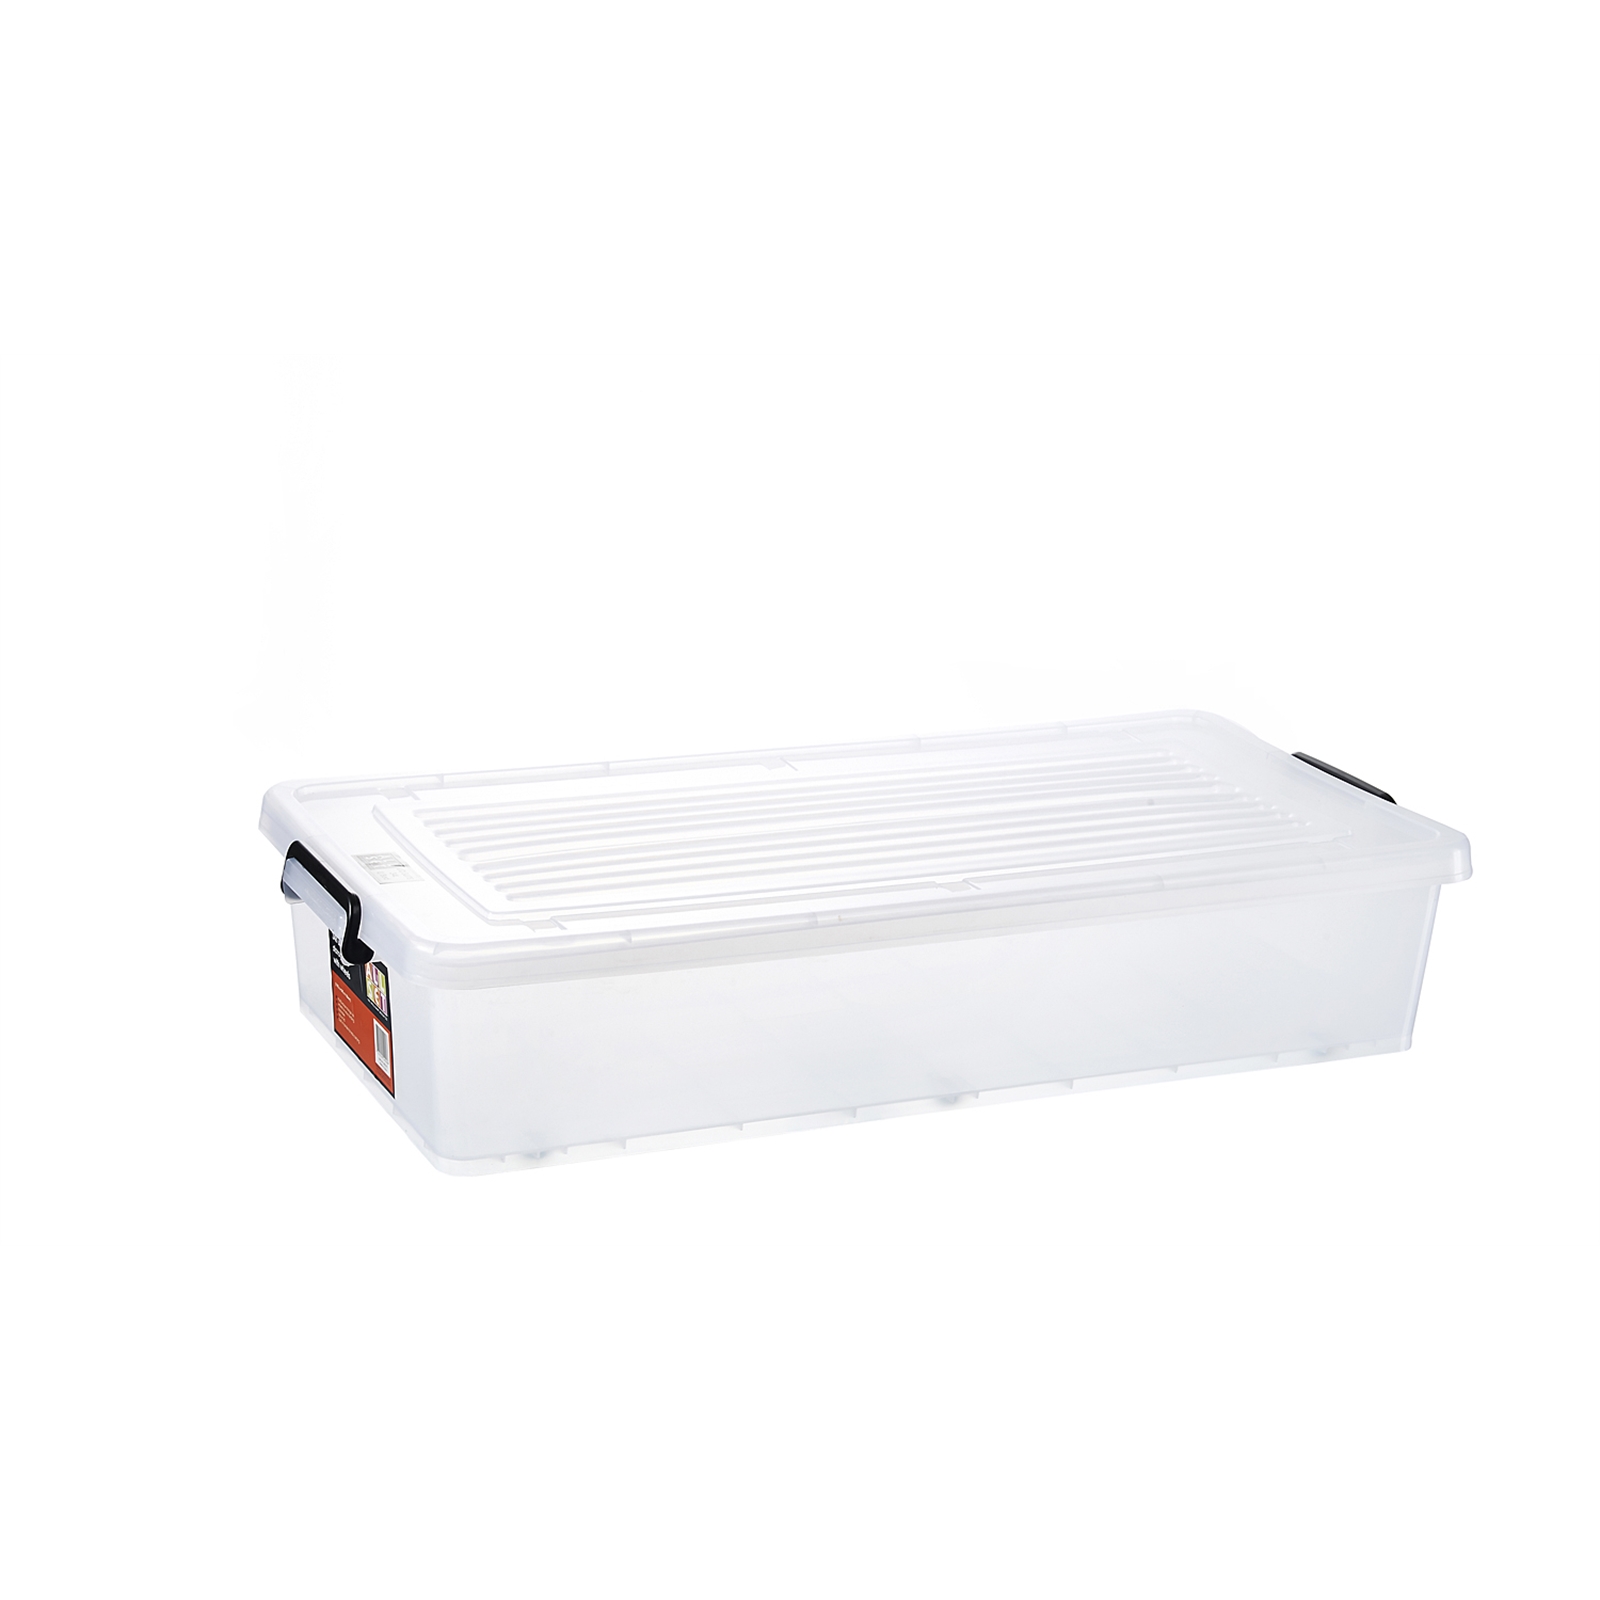 All Set 34L Under Bed Storage Container With Wheels